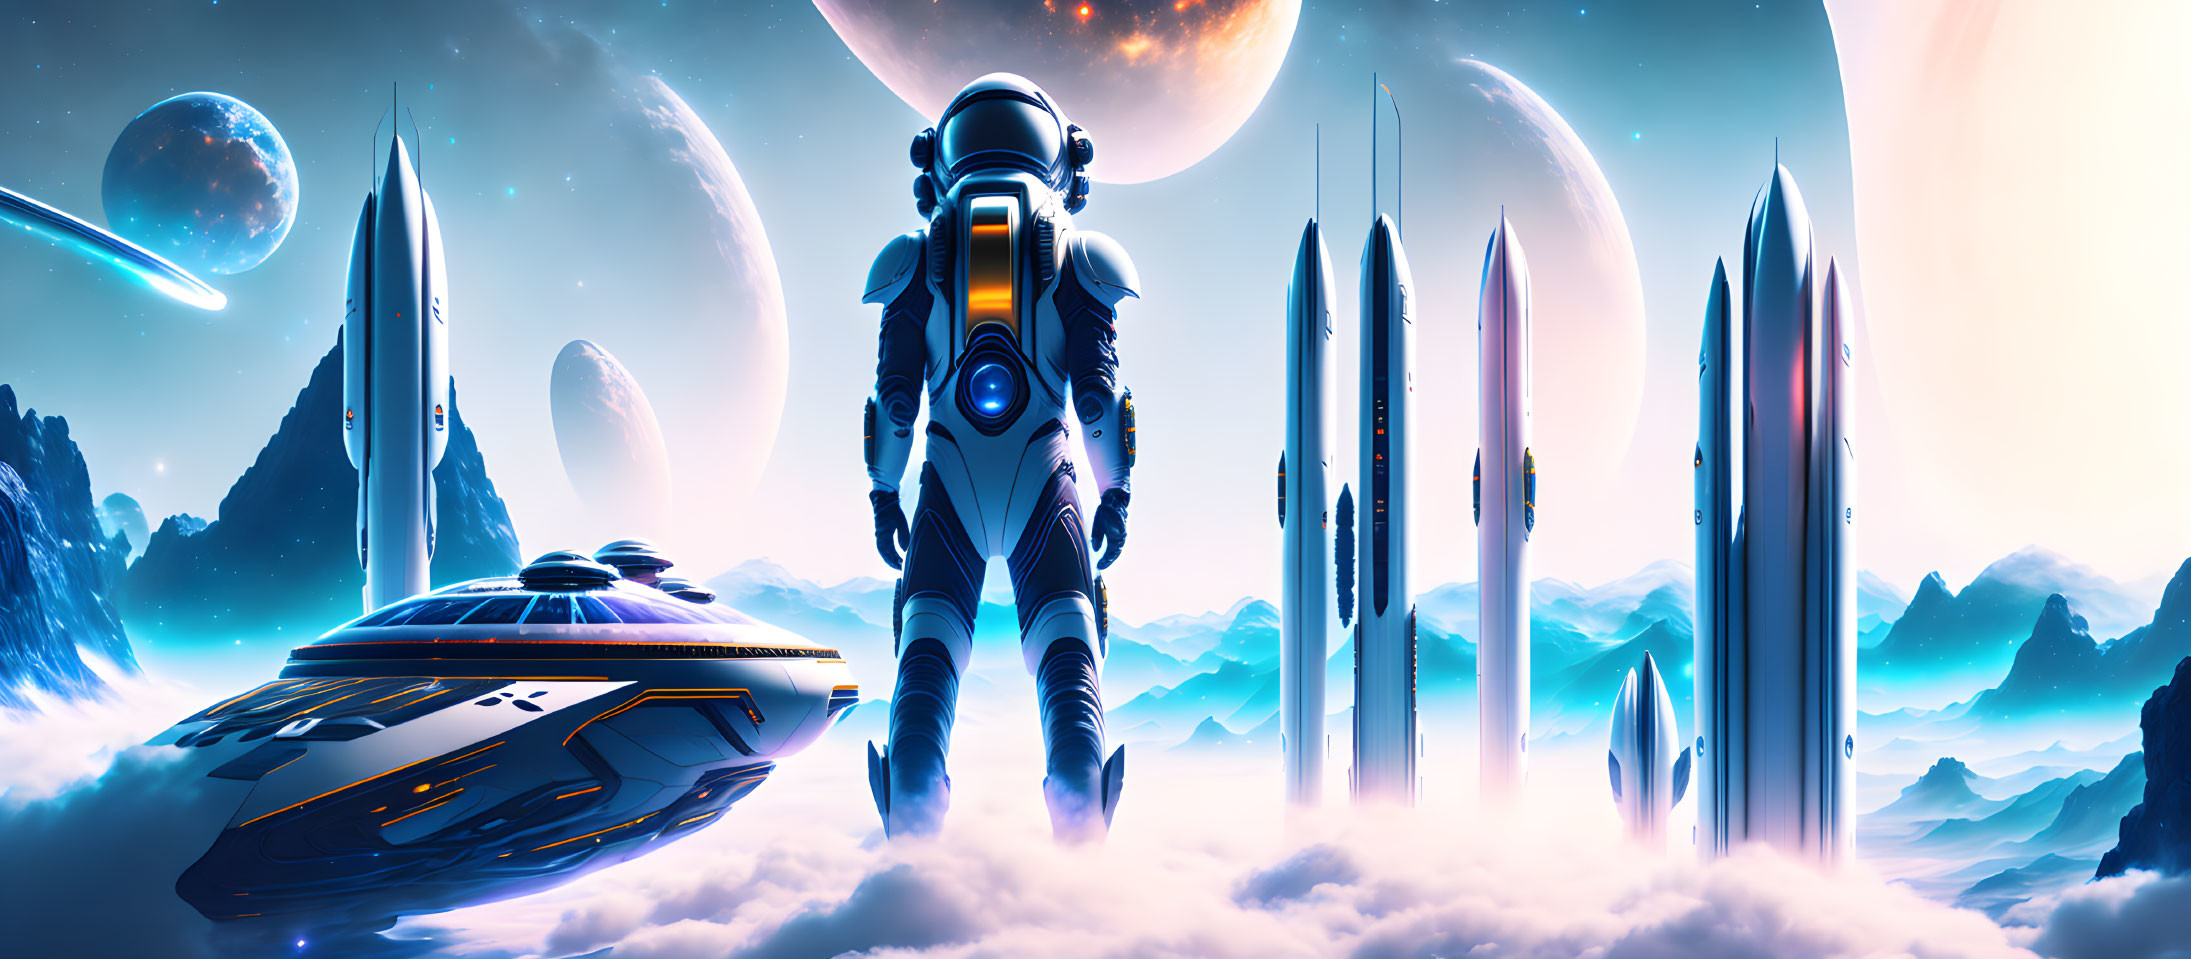 Astronaut on alien planet with futuristic buildings and spaceship.